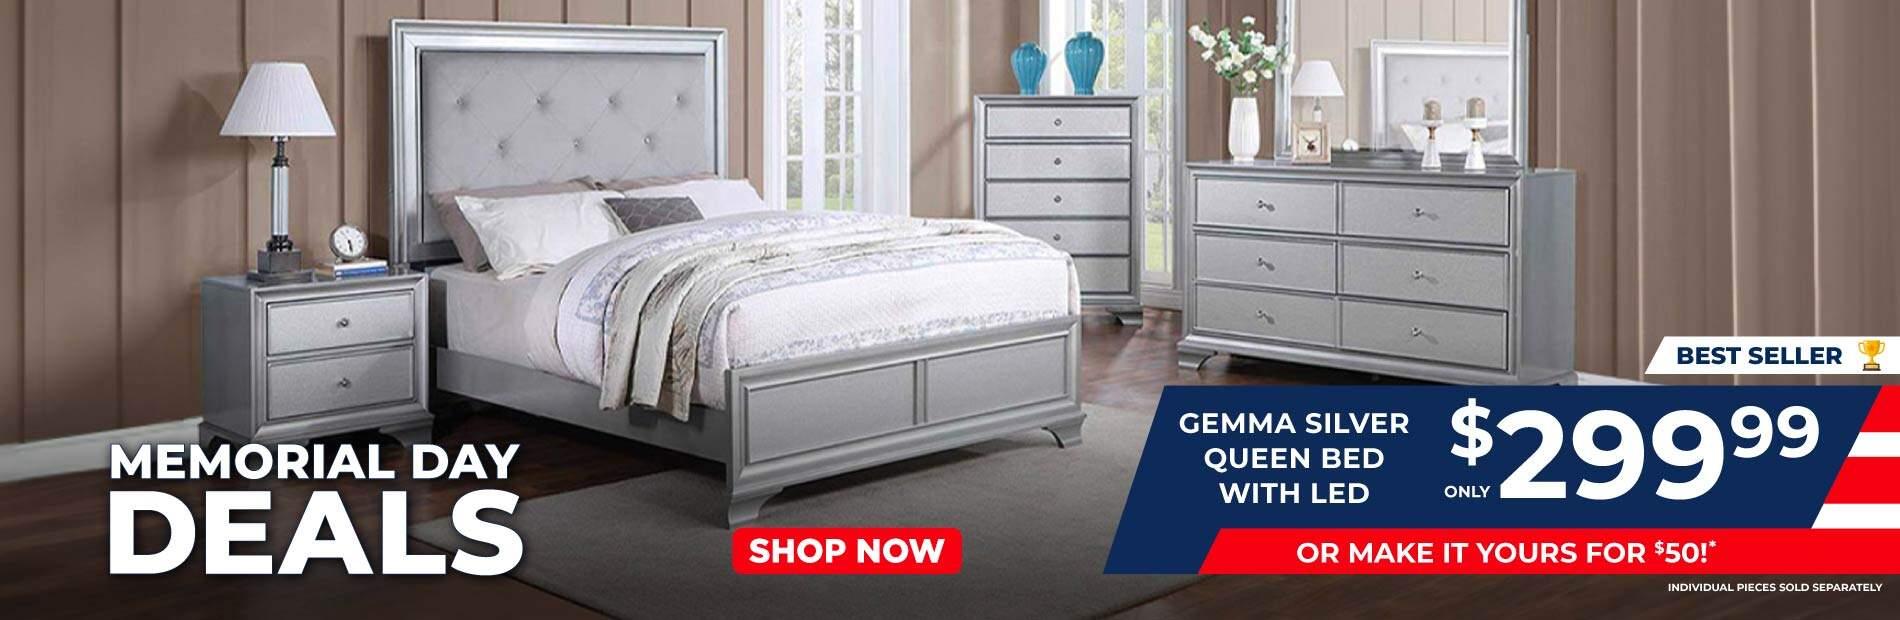 Memorial Day Deals. Best Seller! Gemma Silver Queen bed with LED. Only 299.99 or make it yours for 50.00.Individual pieces sold separetly.